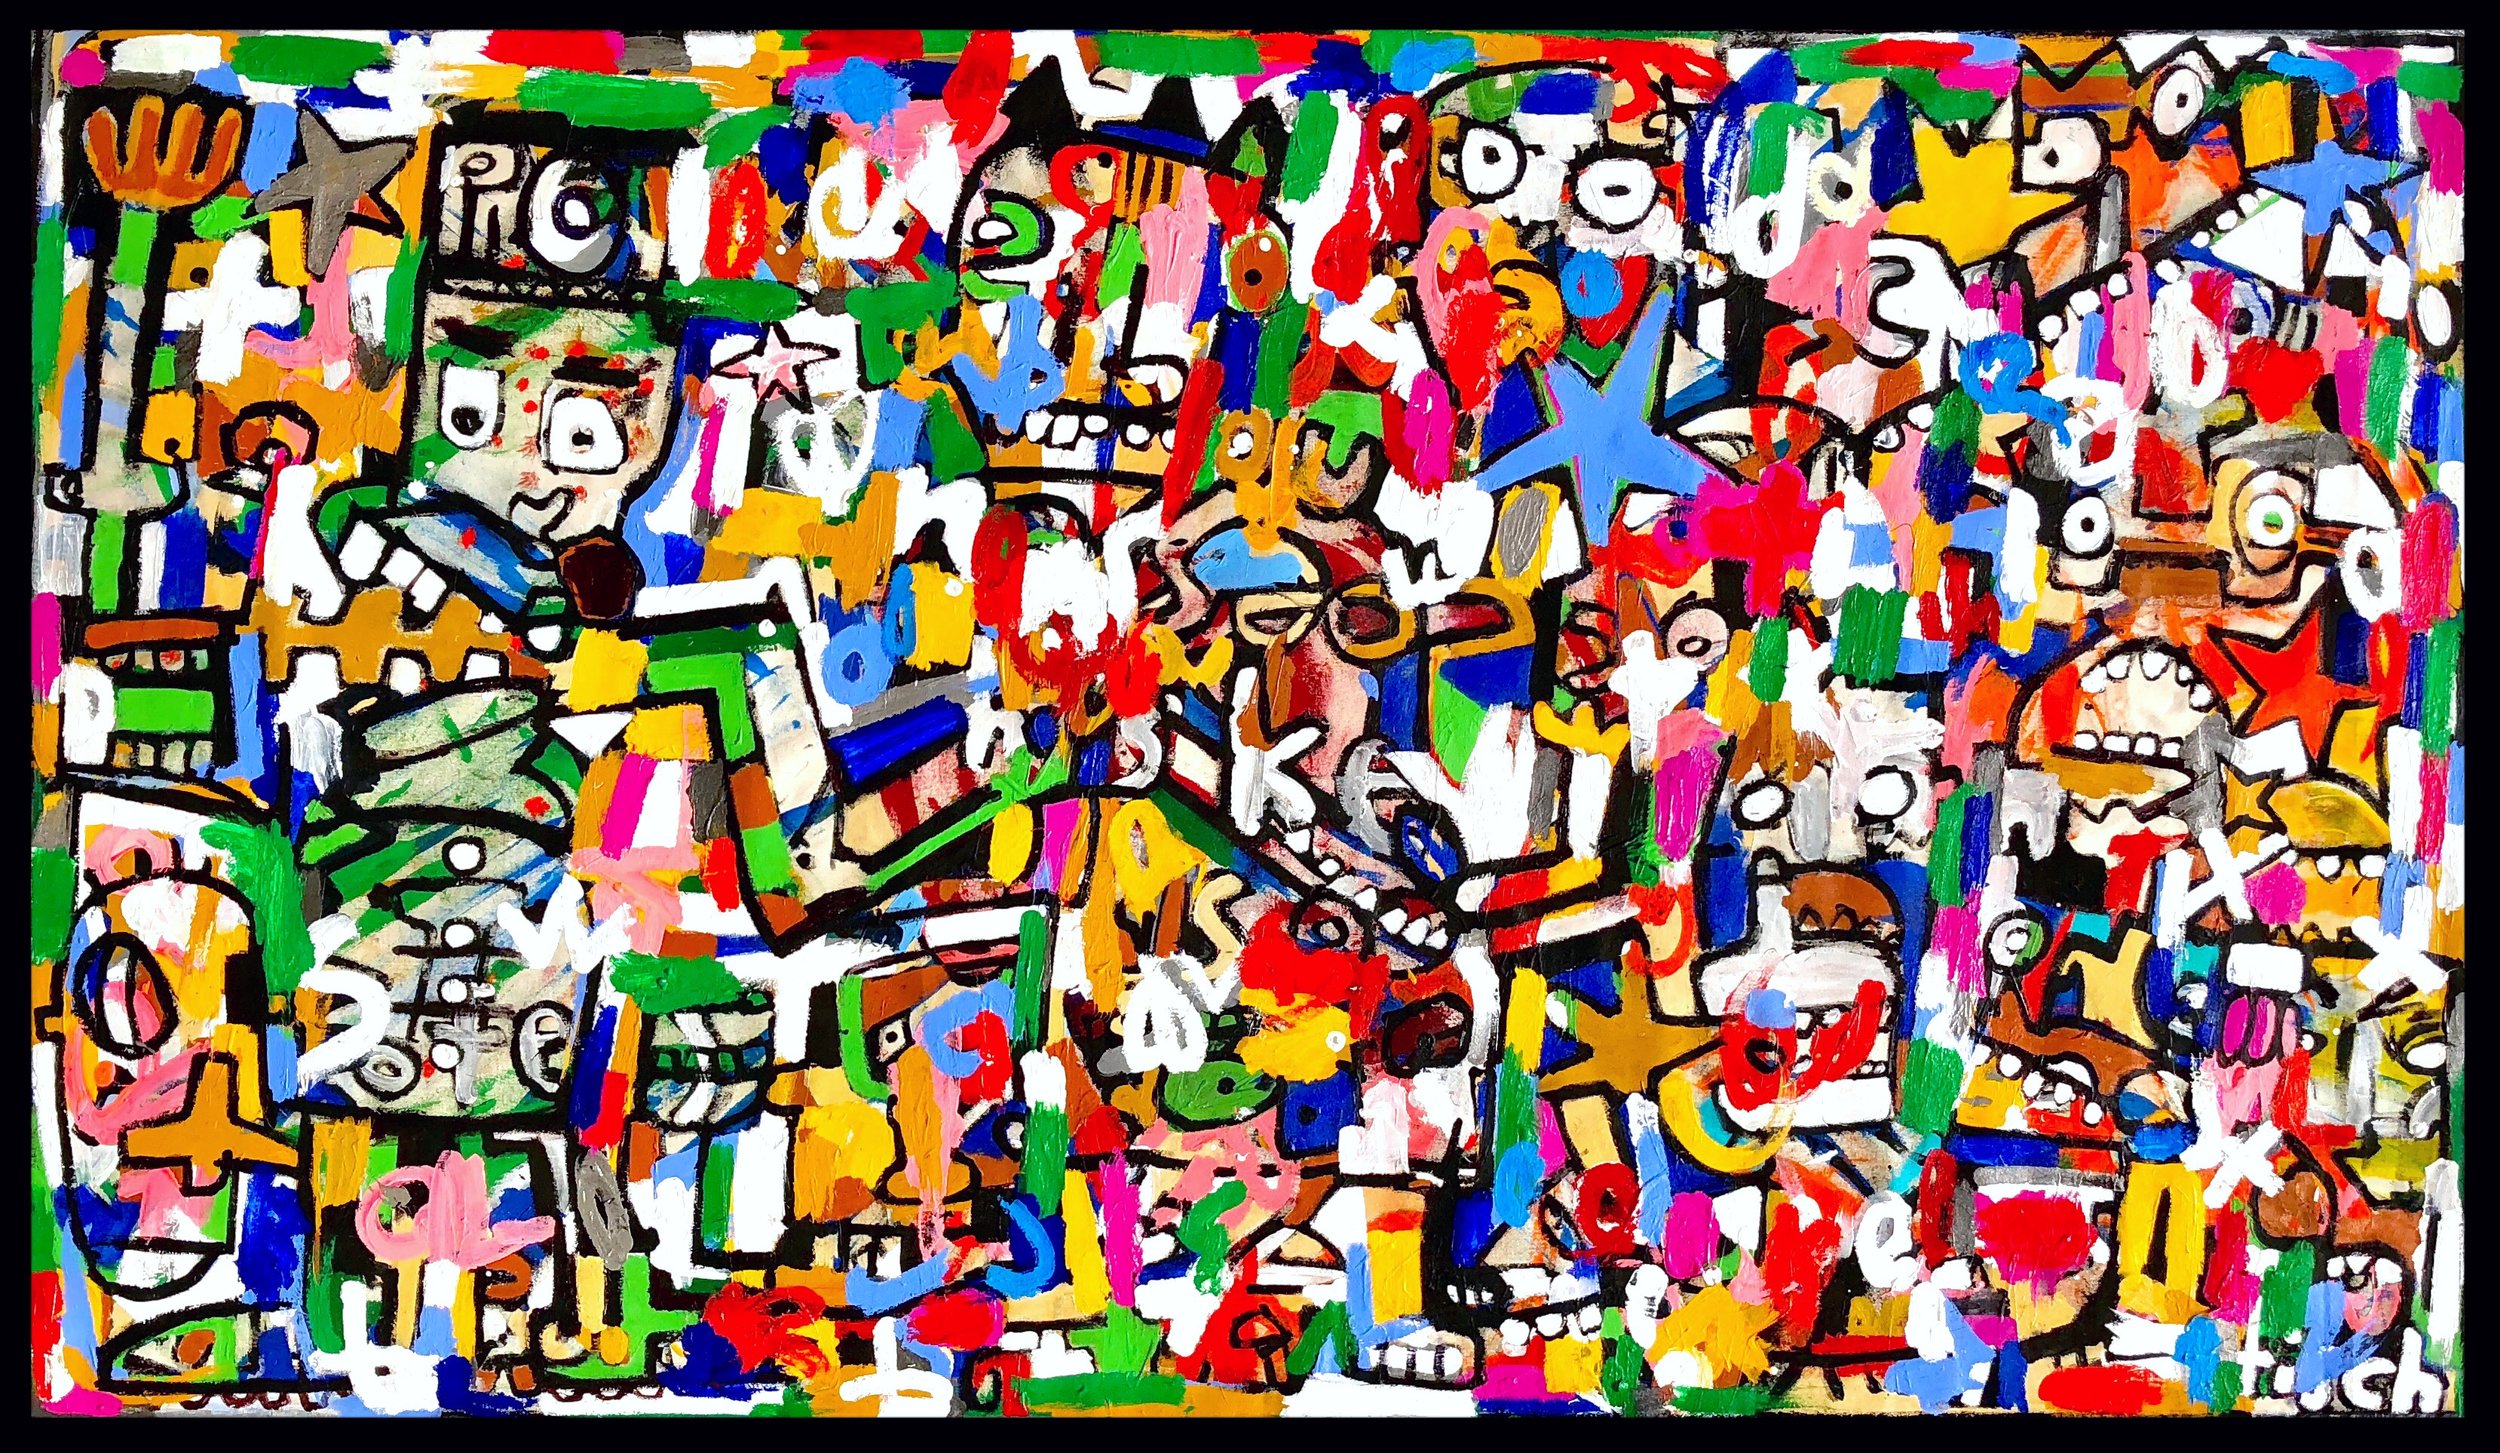 Rockets To Russia, 46x80"